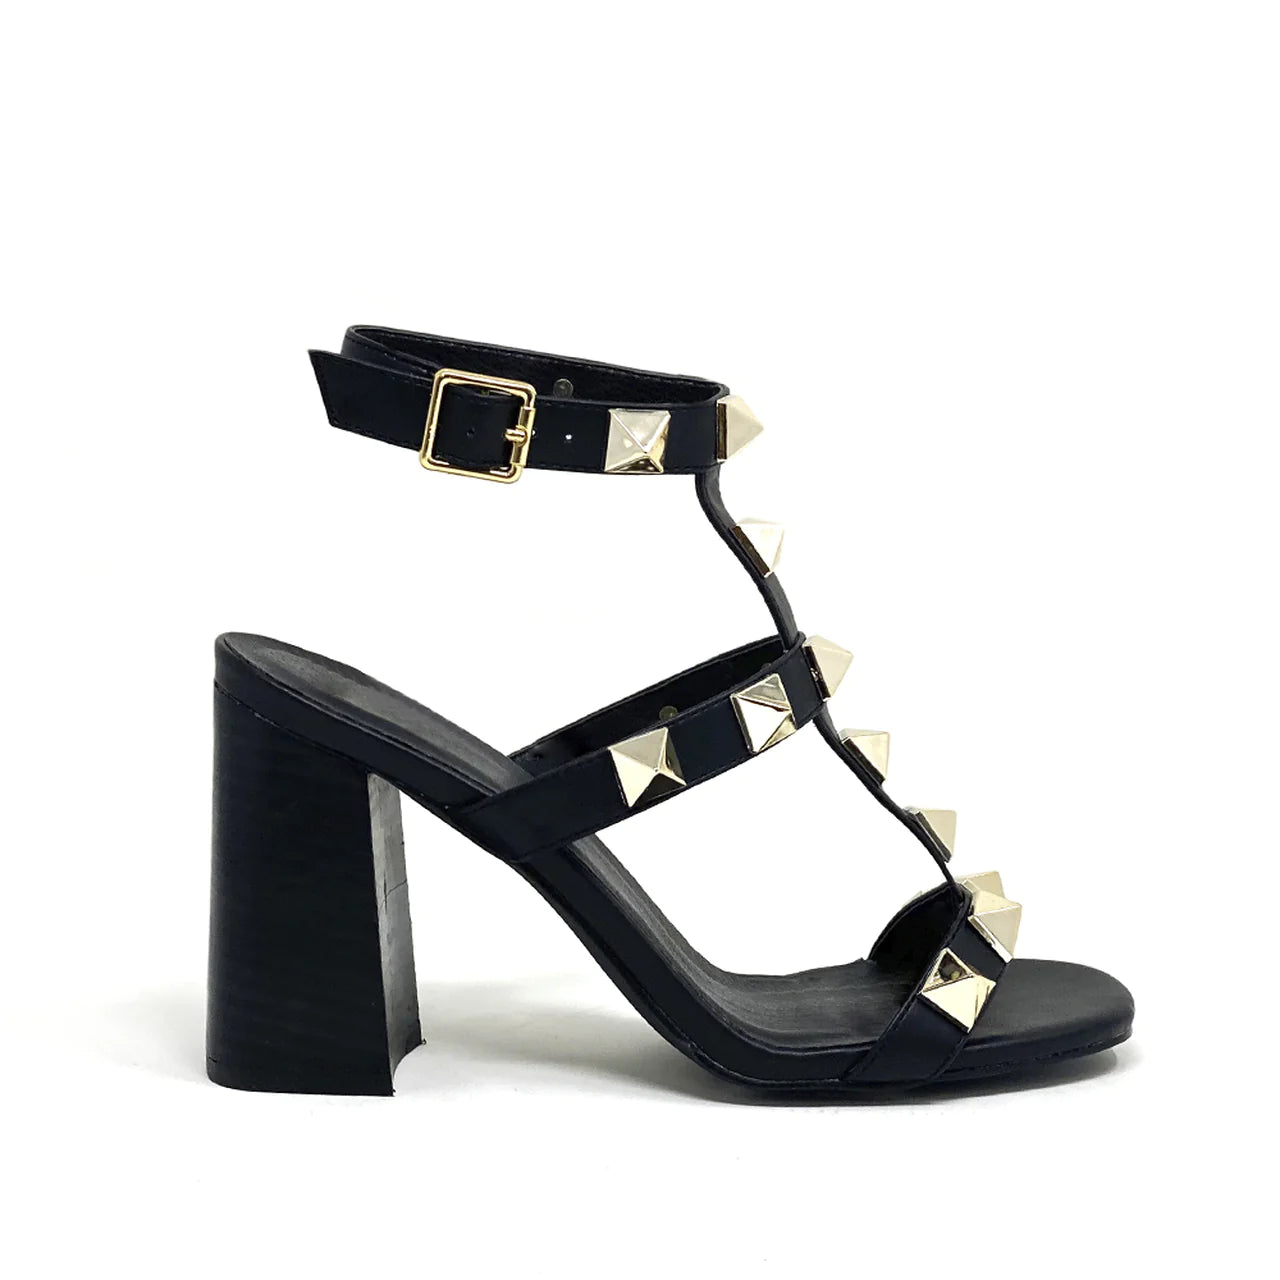 Strappy Studded Sandal with Heel